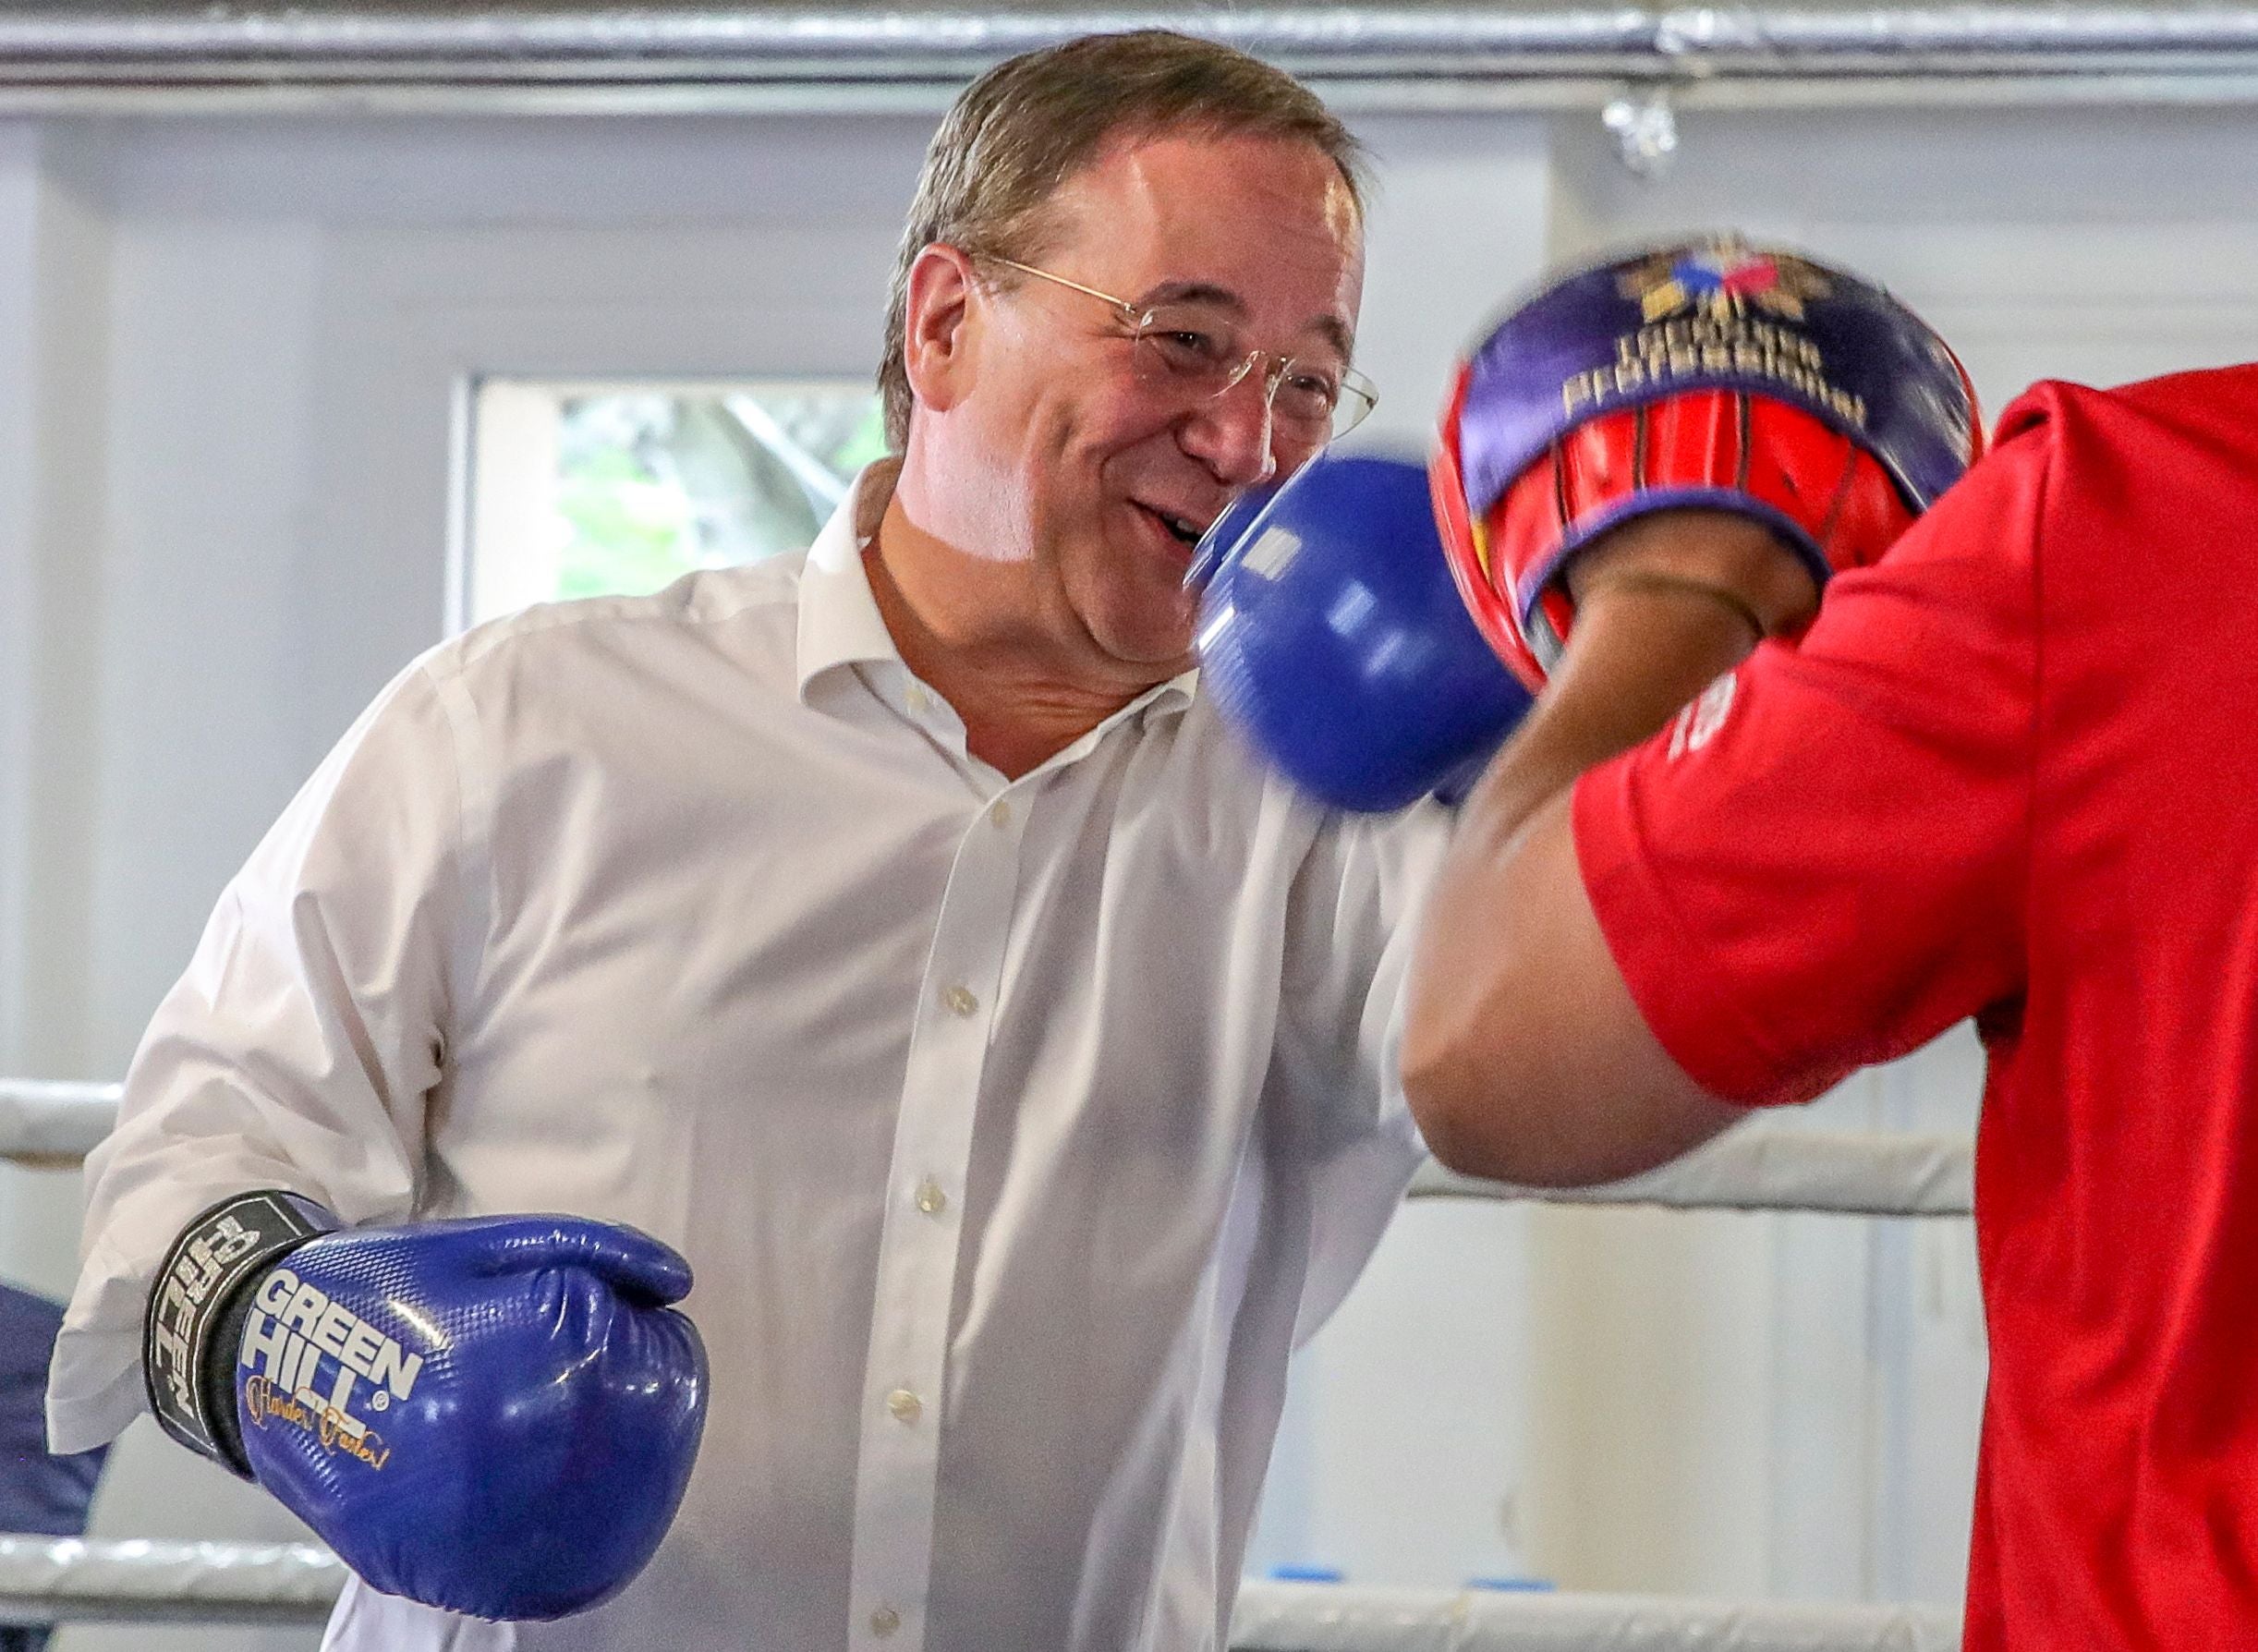 Christian Democratic Union (CDU) leader and candidate for chancellor Armin Laschet boxes with a trainer during his visit to a children's and youth's boxing camp